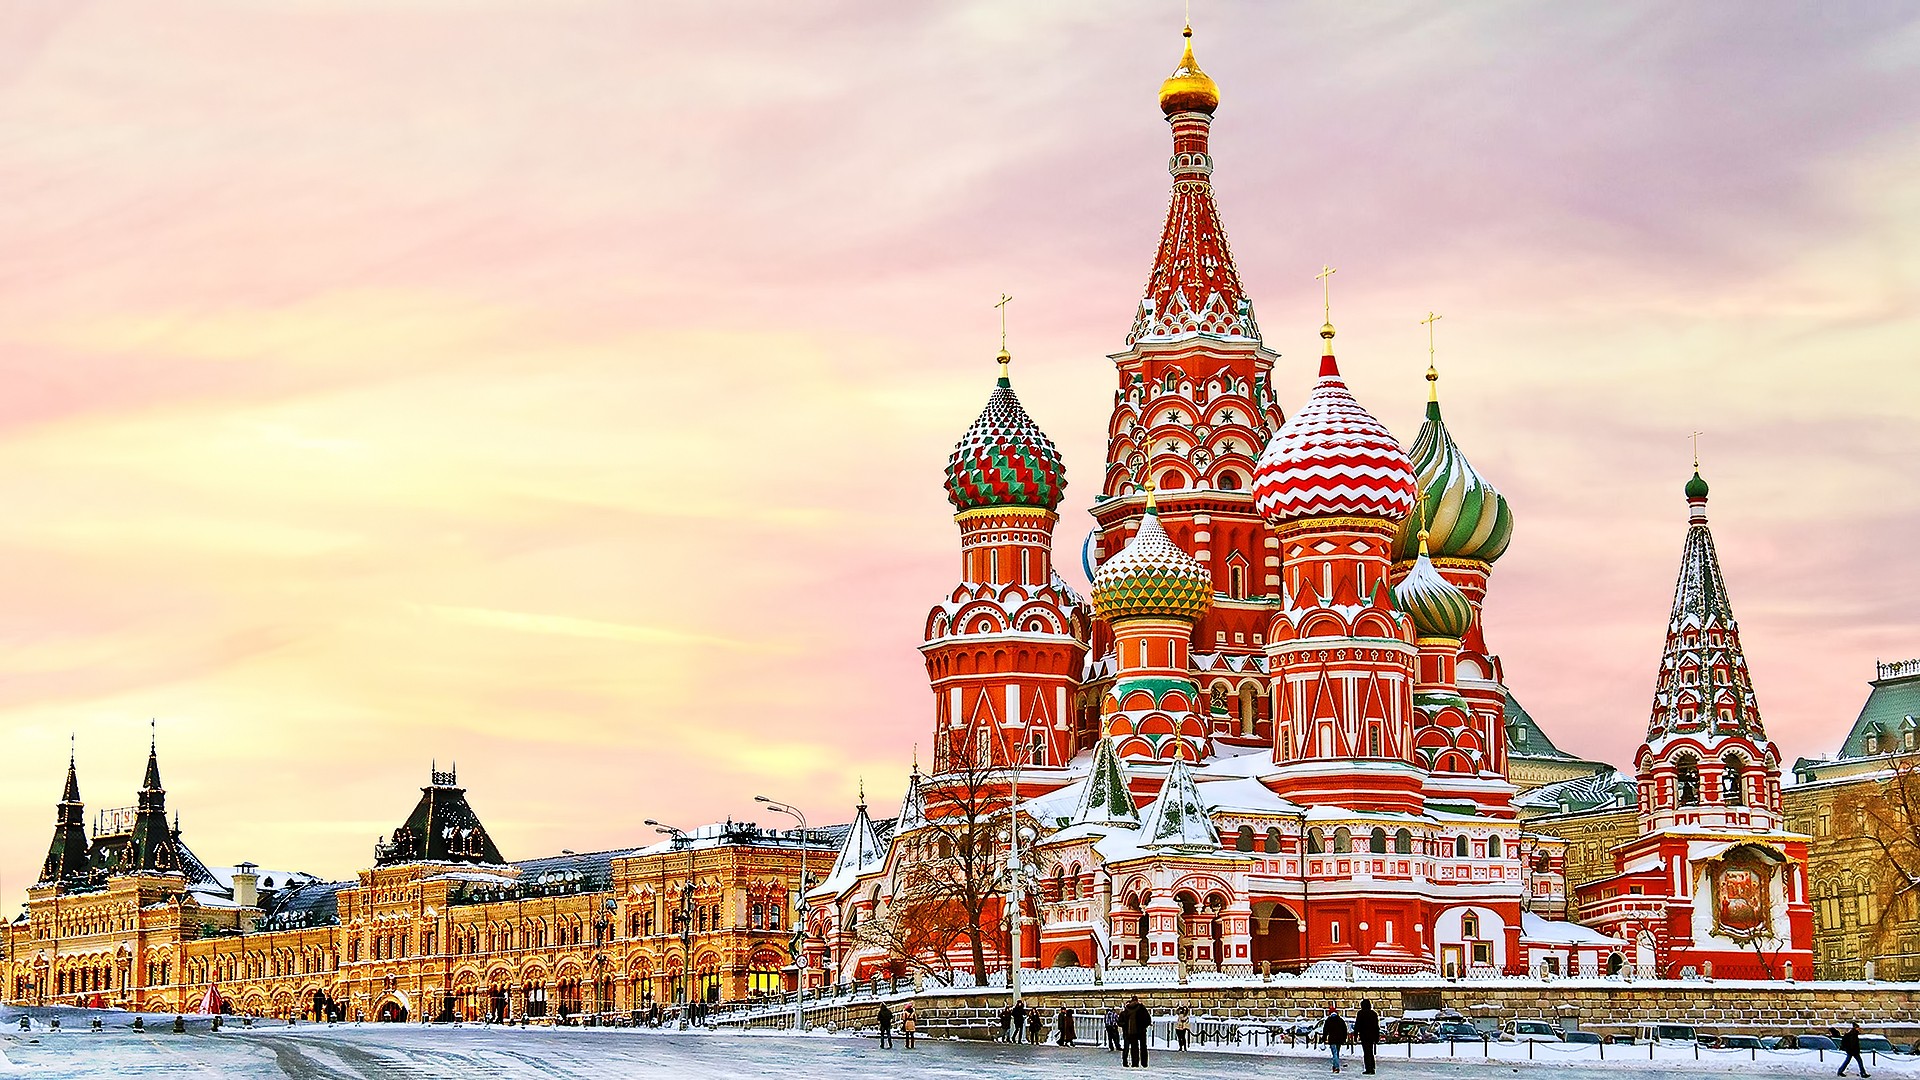 General 1920x1080 Moscow Red Square city Saint Basil's Cathedral Russia building landmark Kremlin Europe vibrant